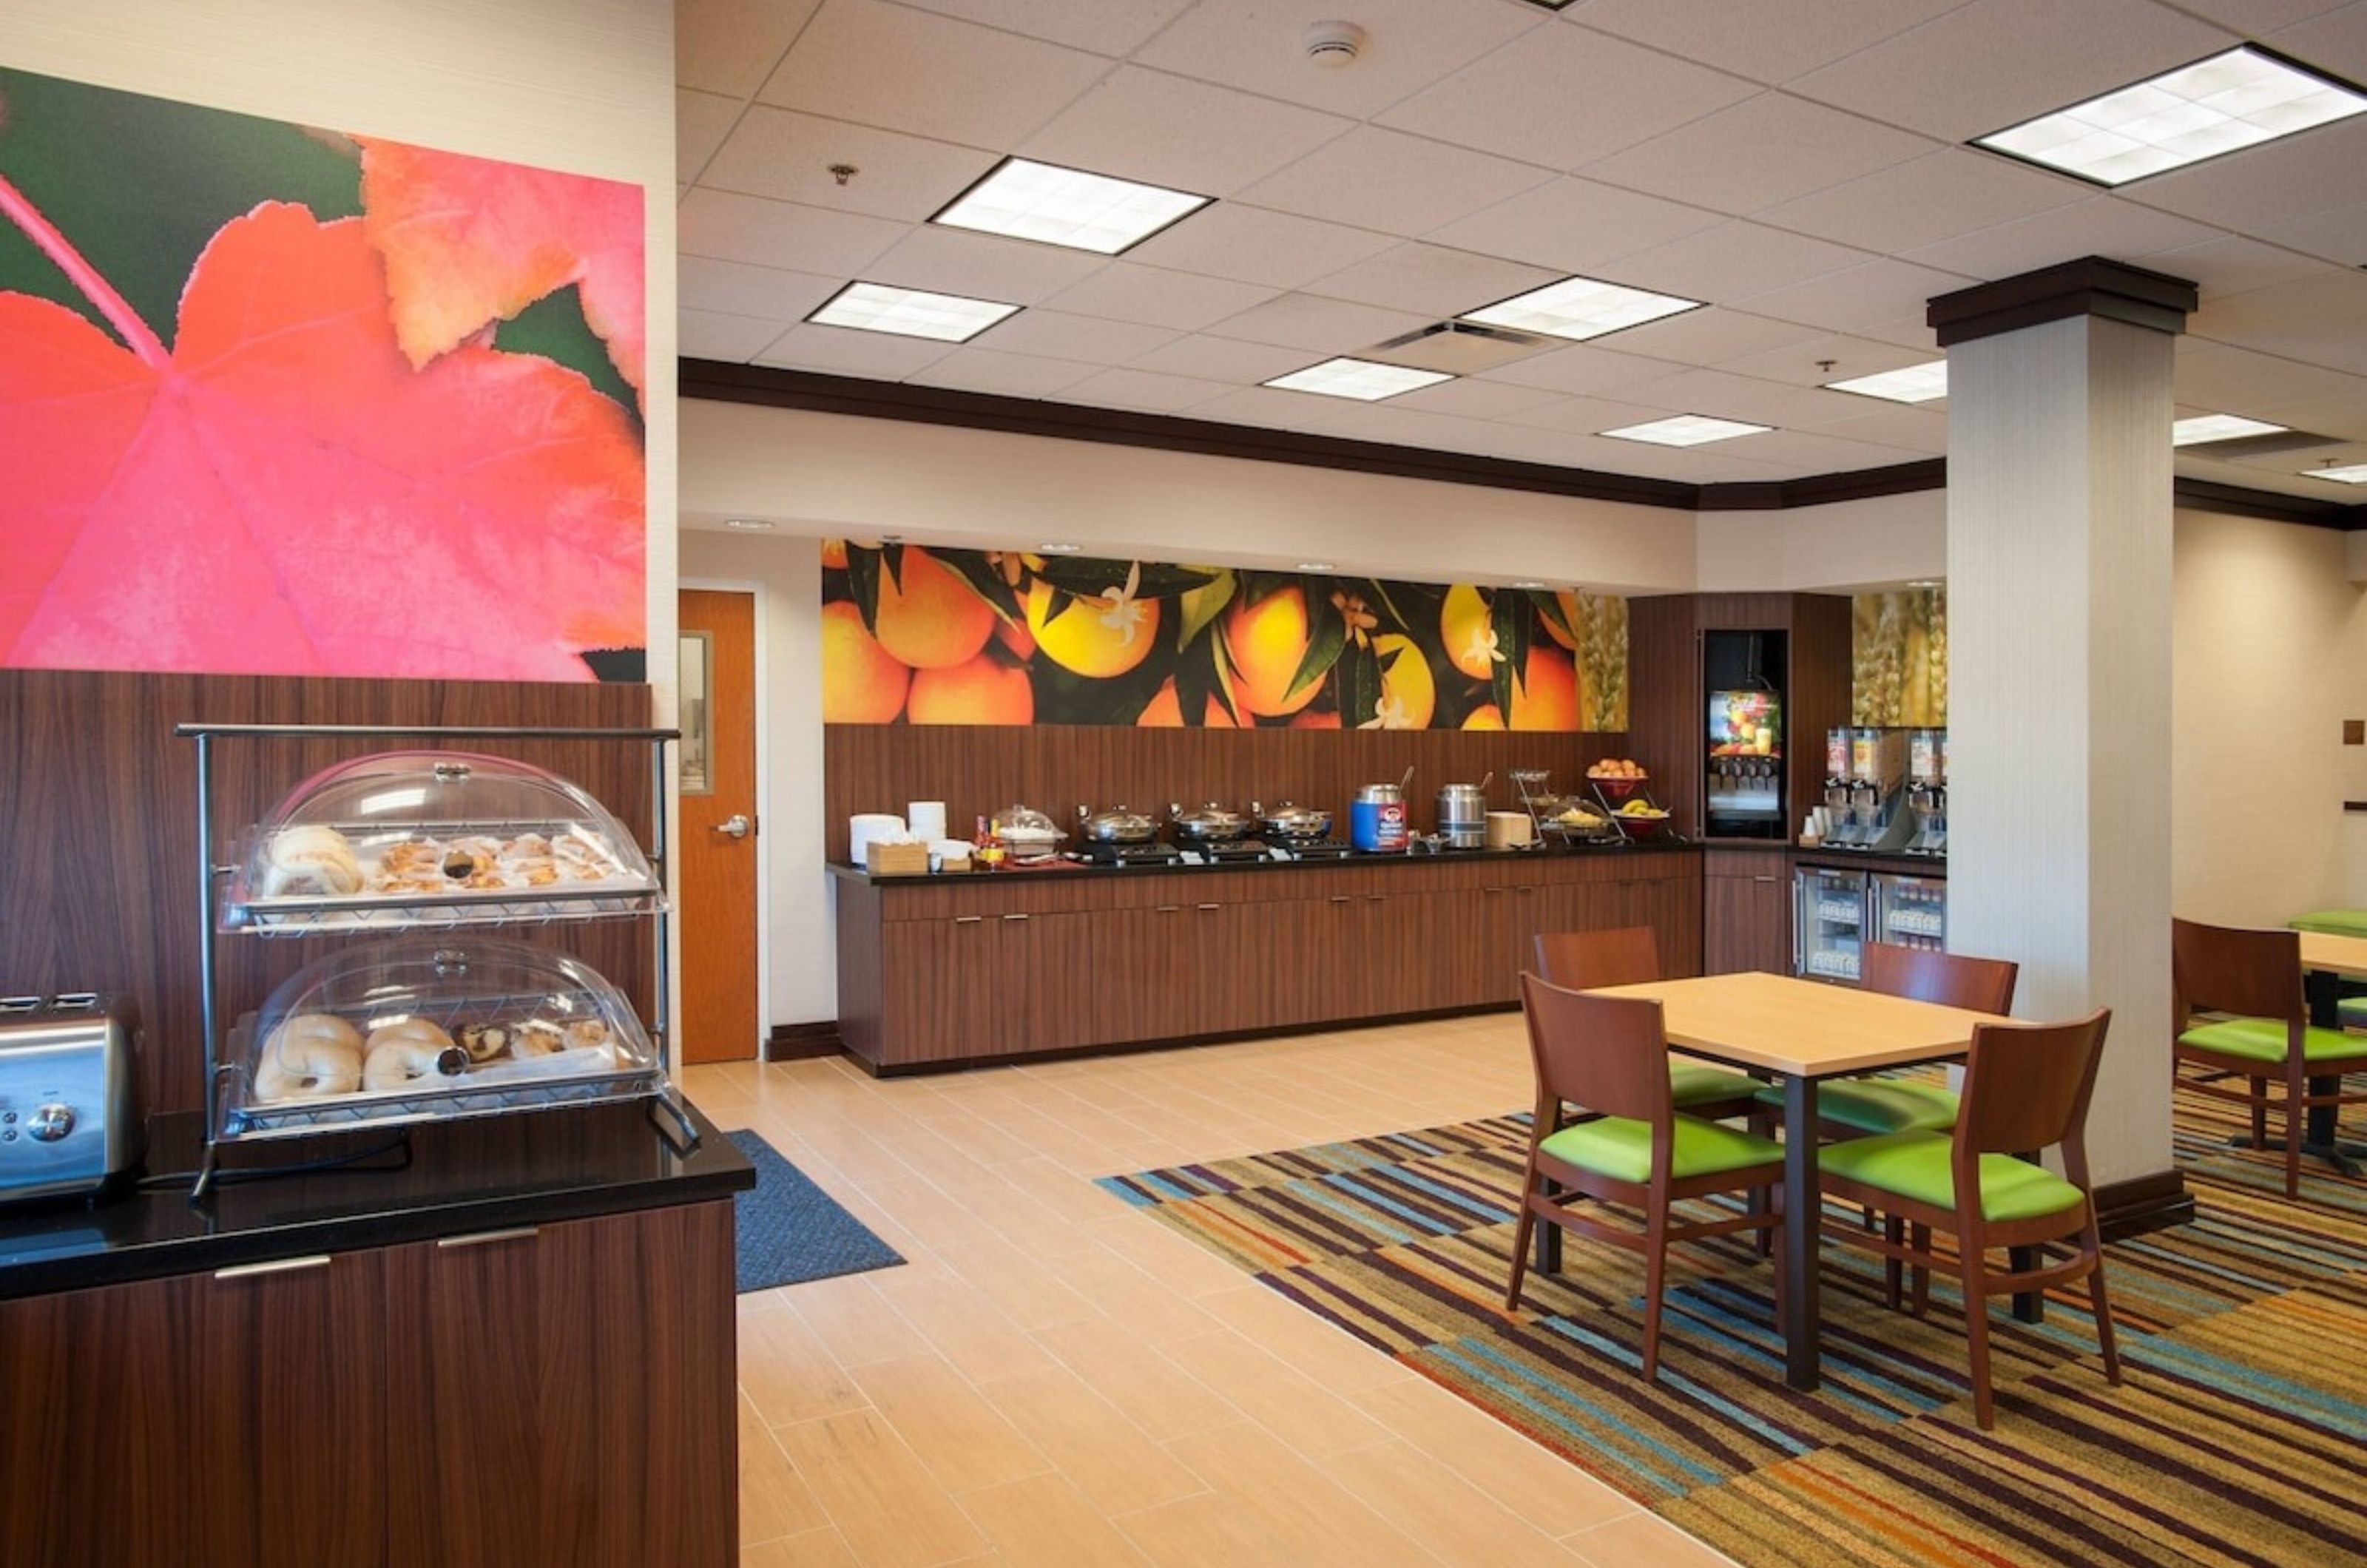 The complimentary Continental breakfast buffet and Fairfield Inn and Suites	